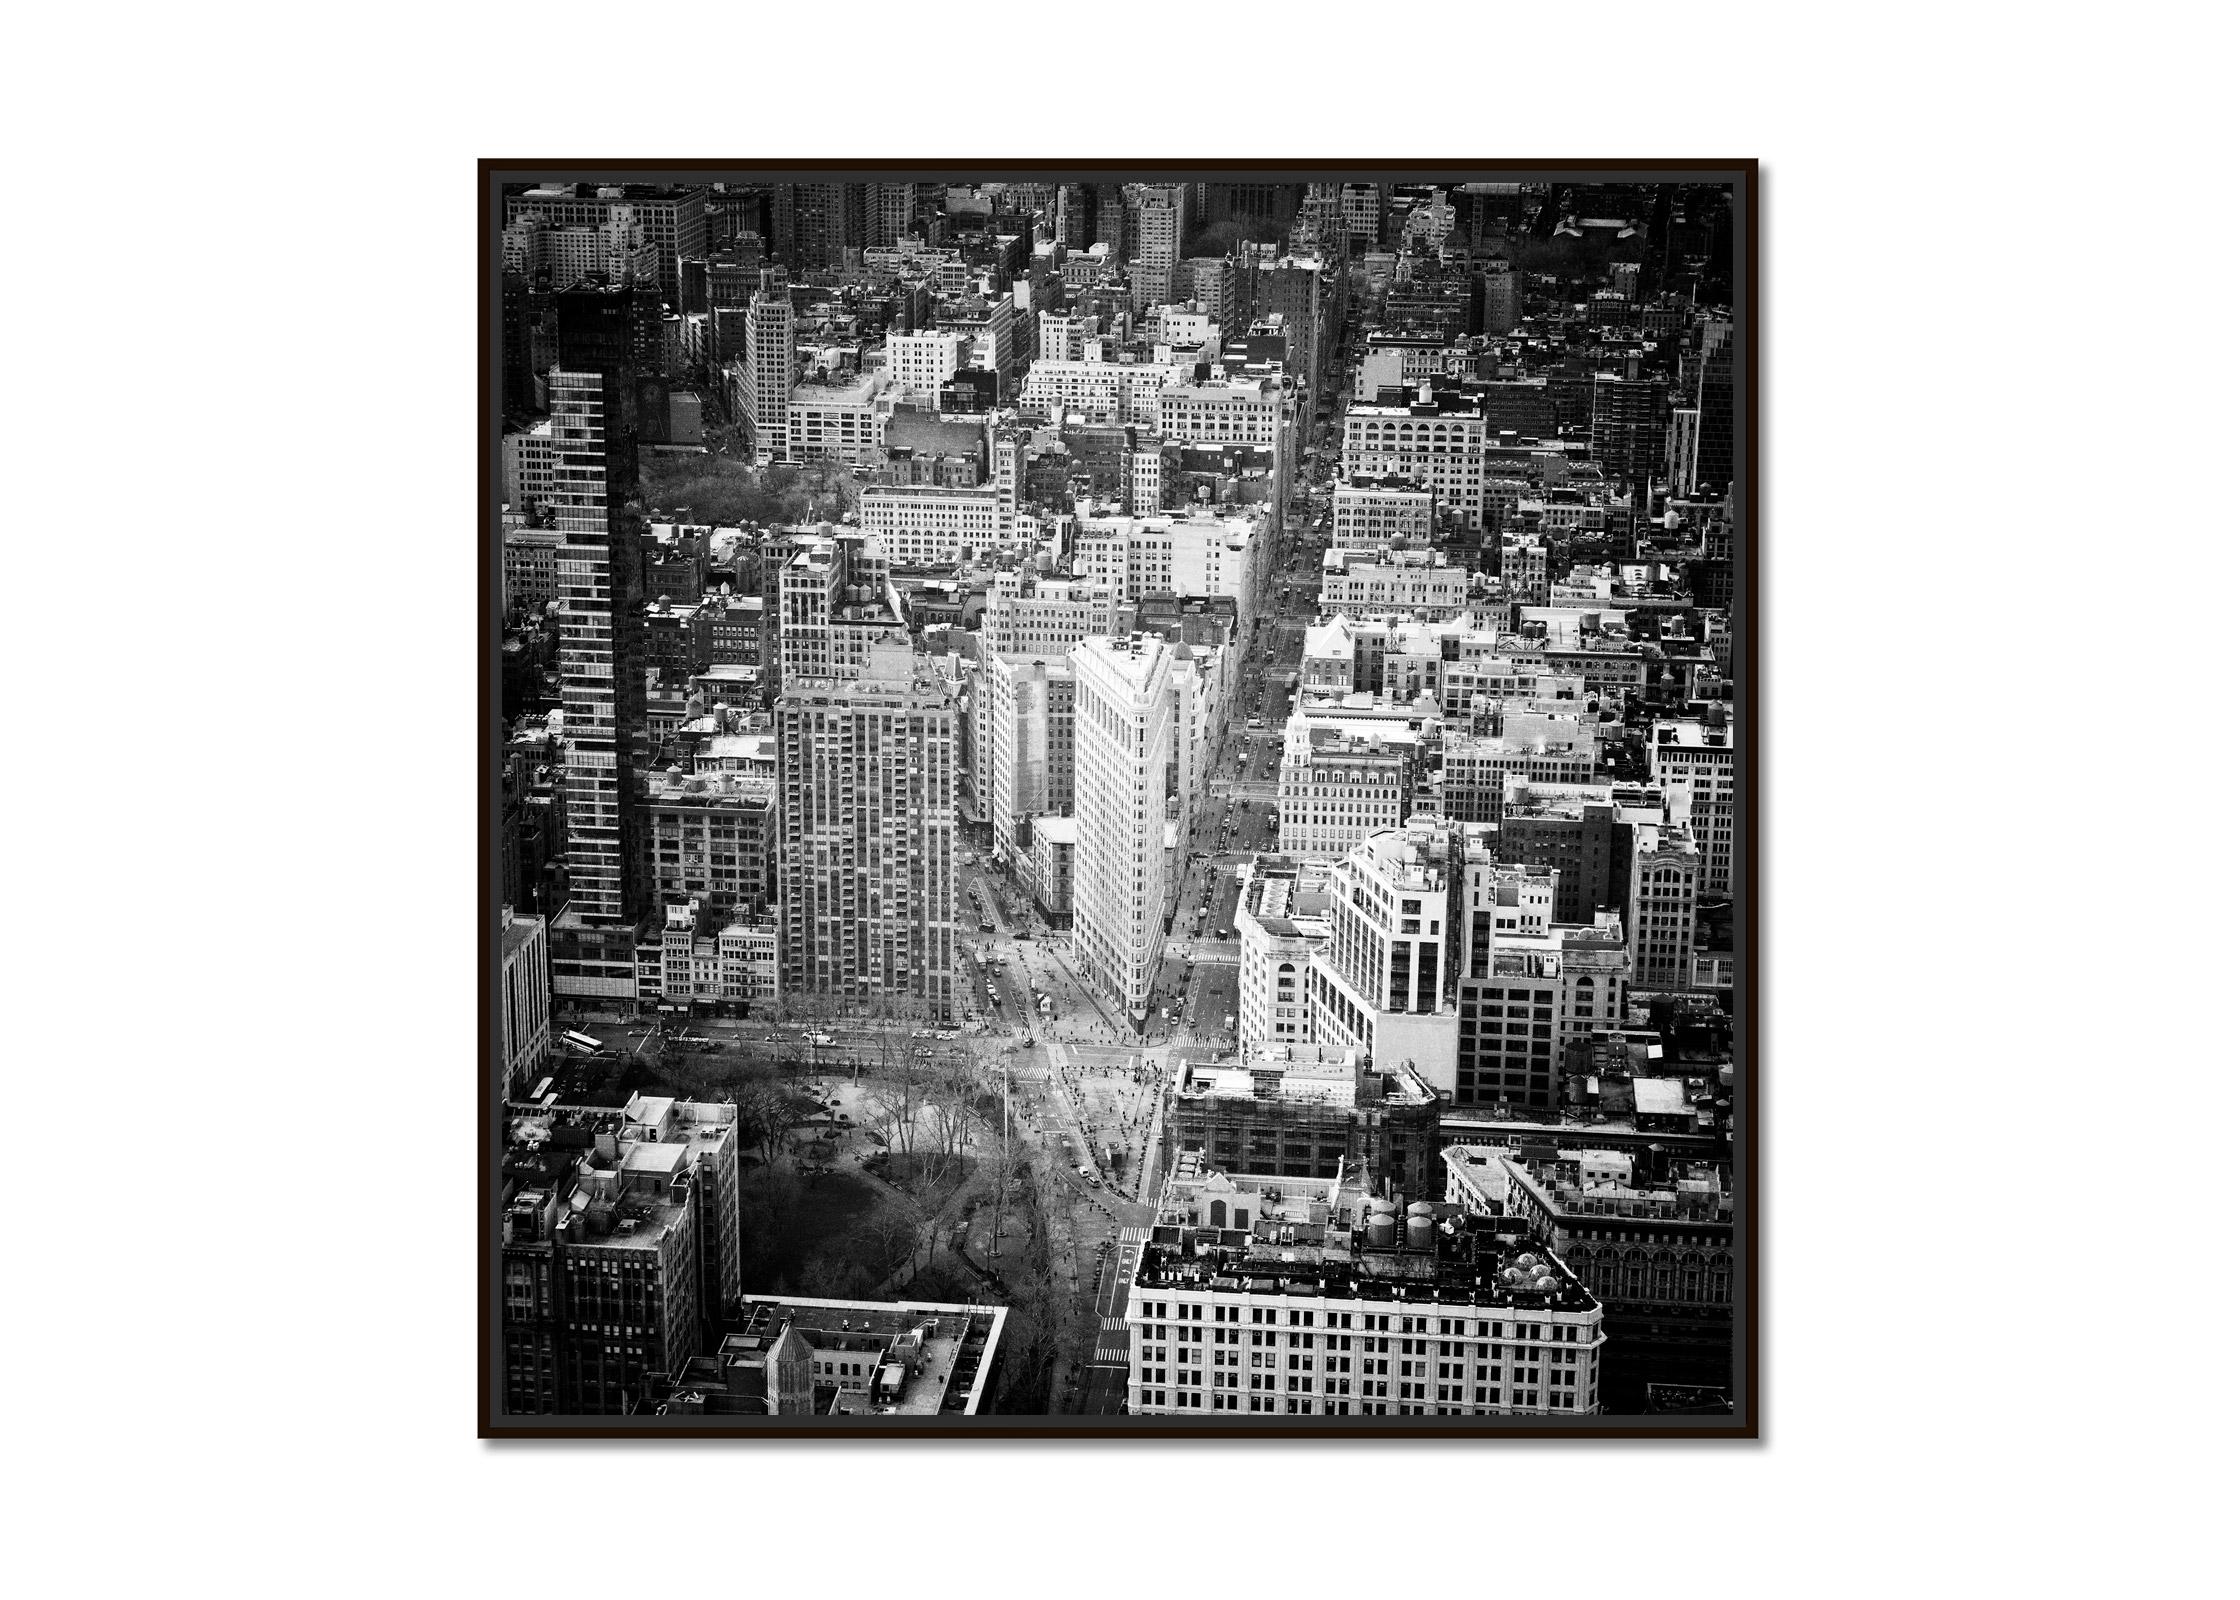 Black and White Fine Art cityscape photography. Archival pigment ink print, edition of 9. Signed, titled, dated and numbered by artist. Certificate of authenticity included. Printed with 4cm white border. International award winner photographer -